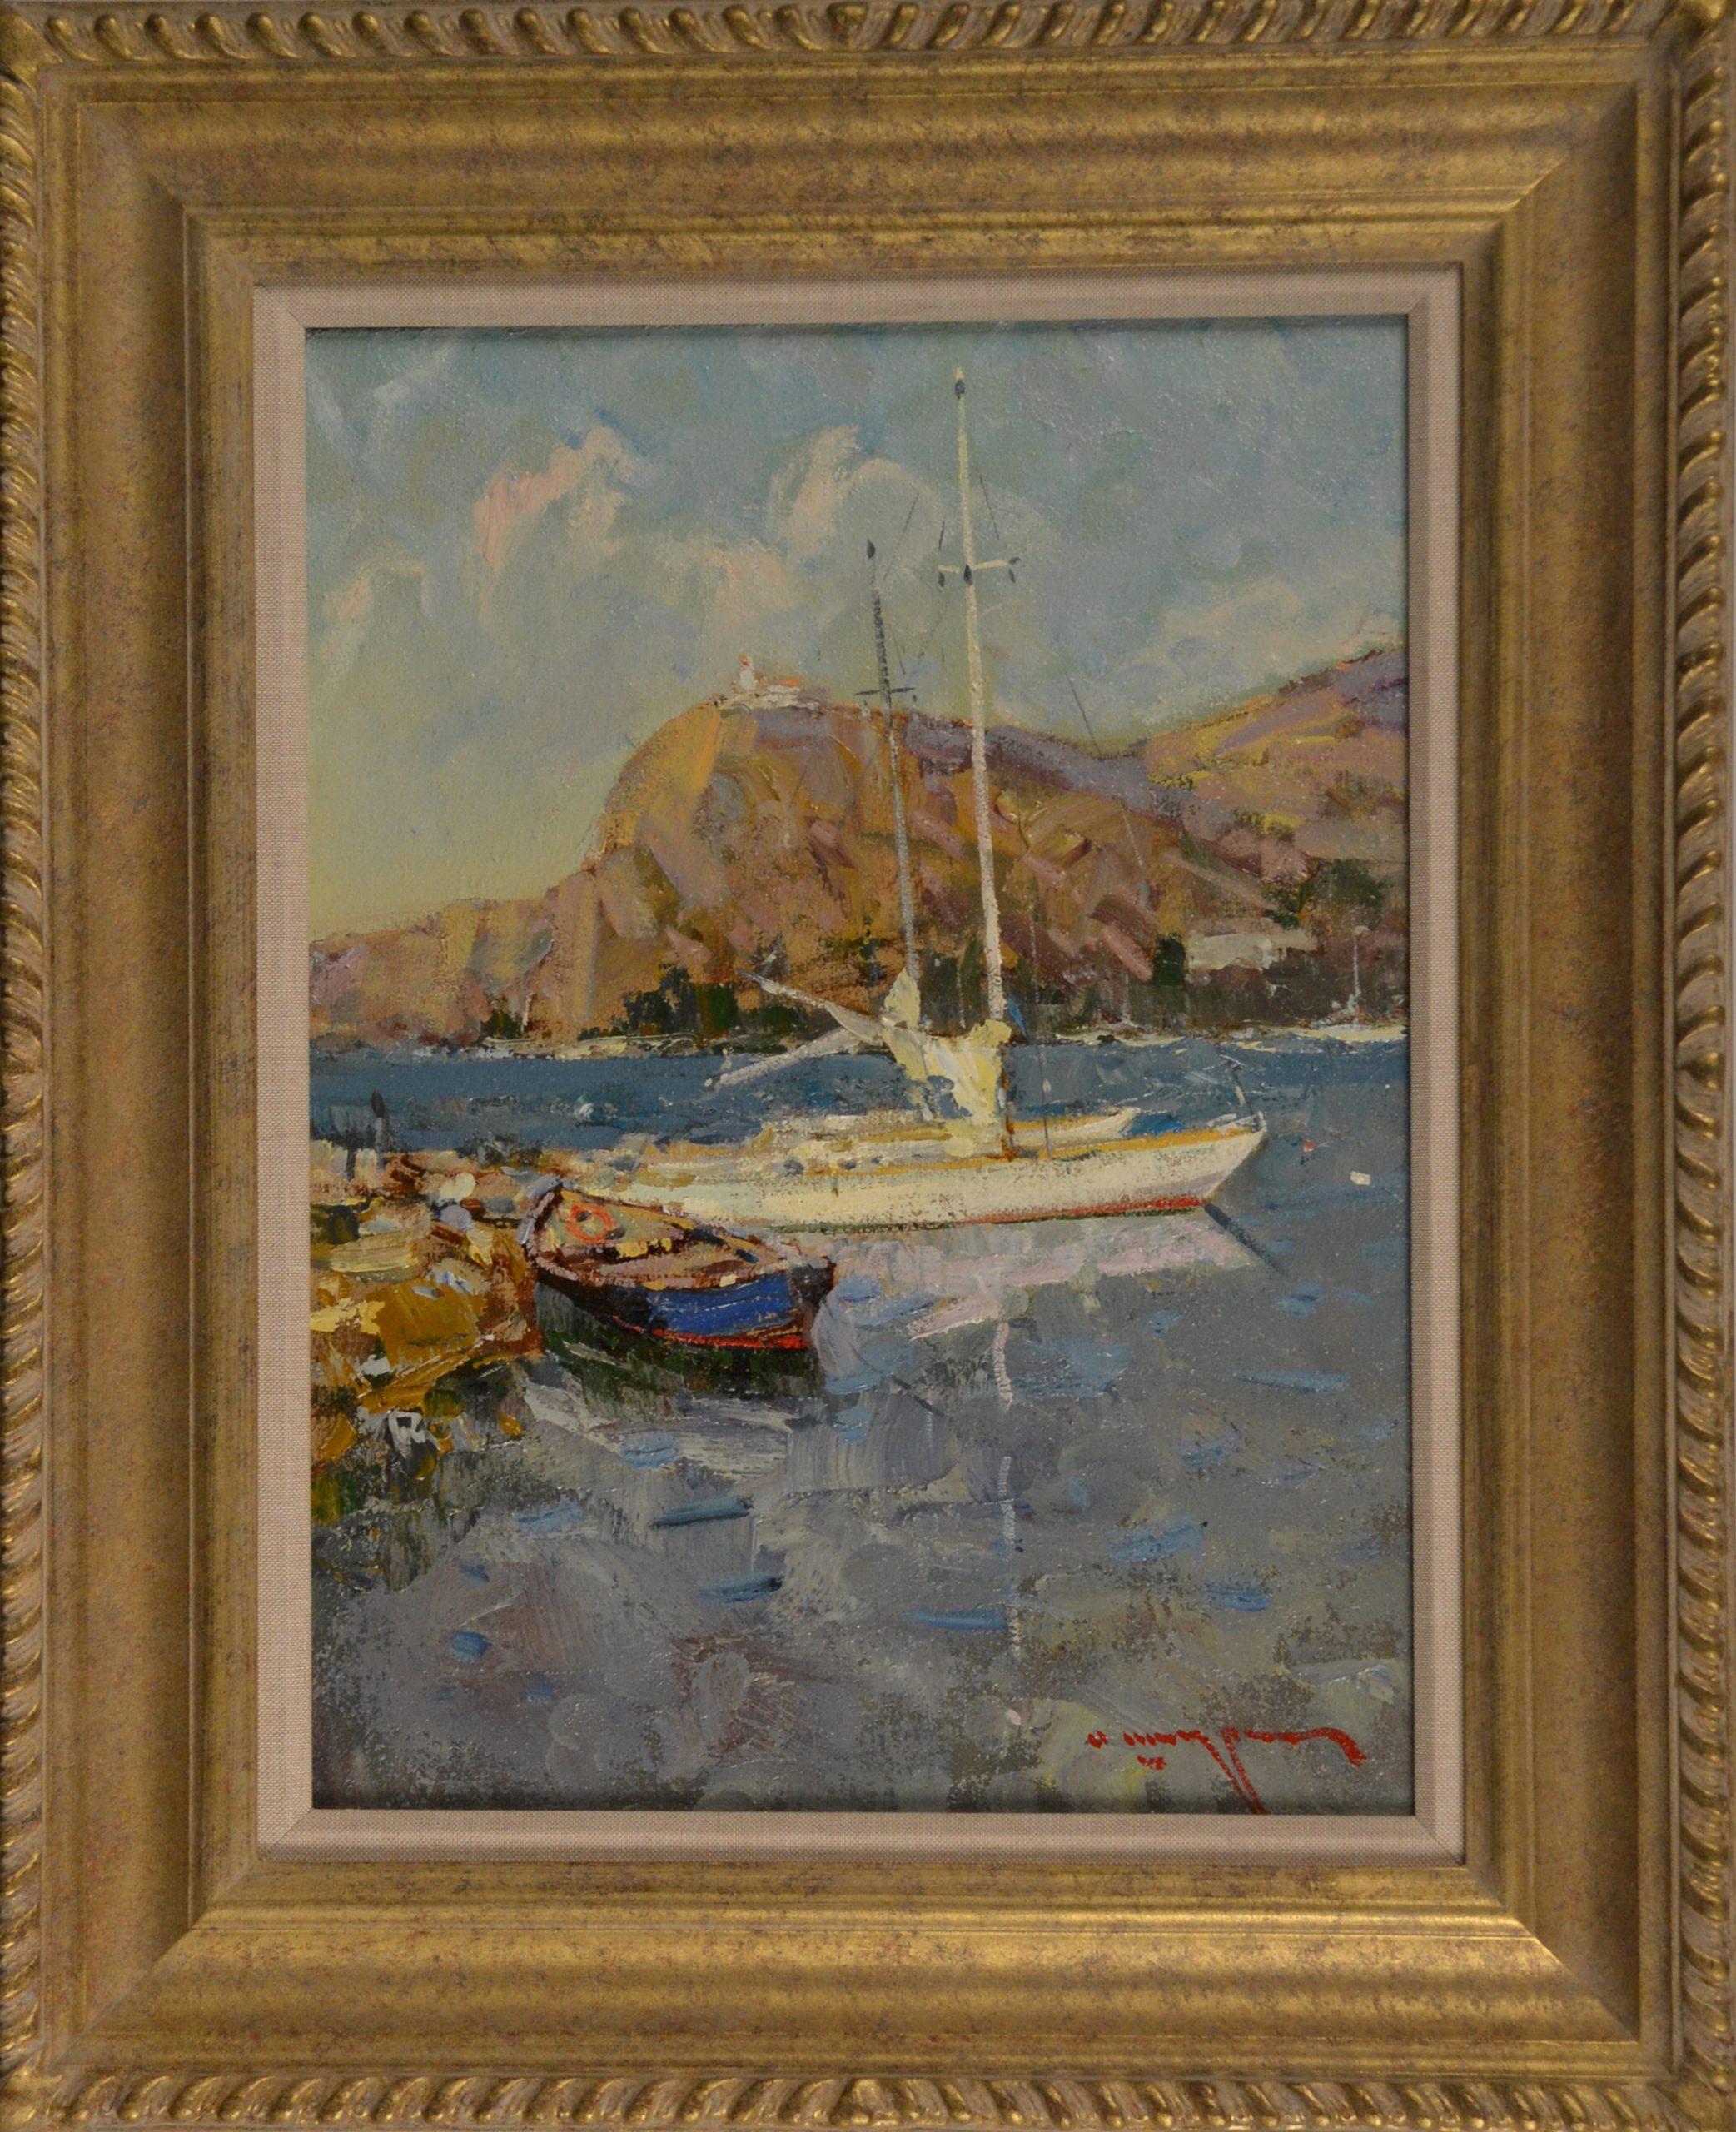 Yacht in the South Bay 1 - Painting by Alexander Petrovich Shadrin 